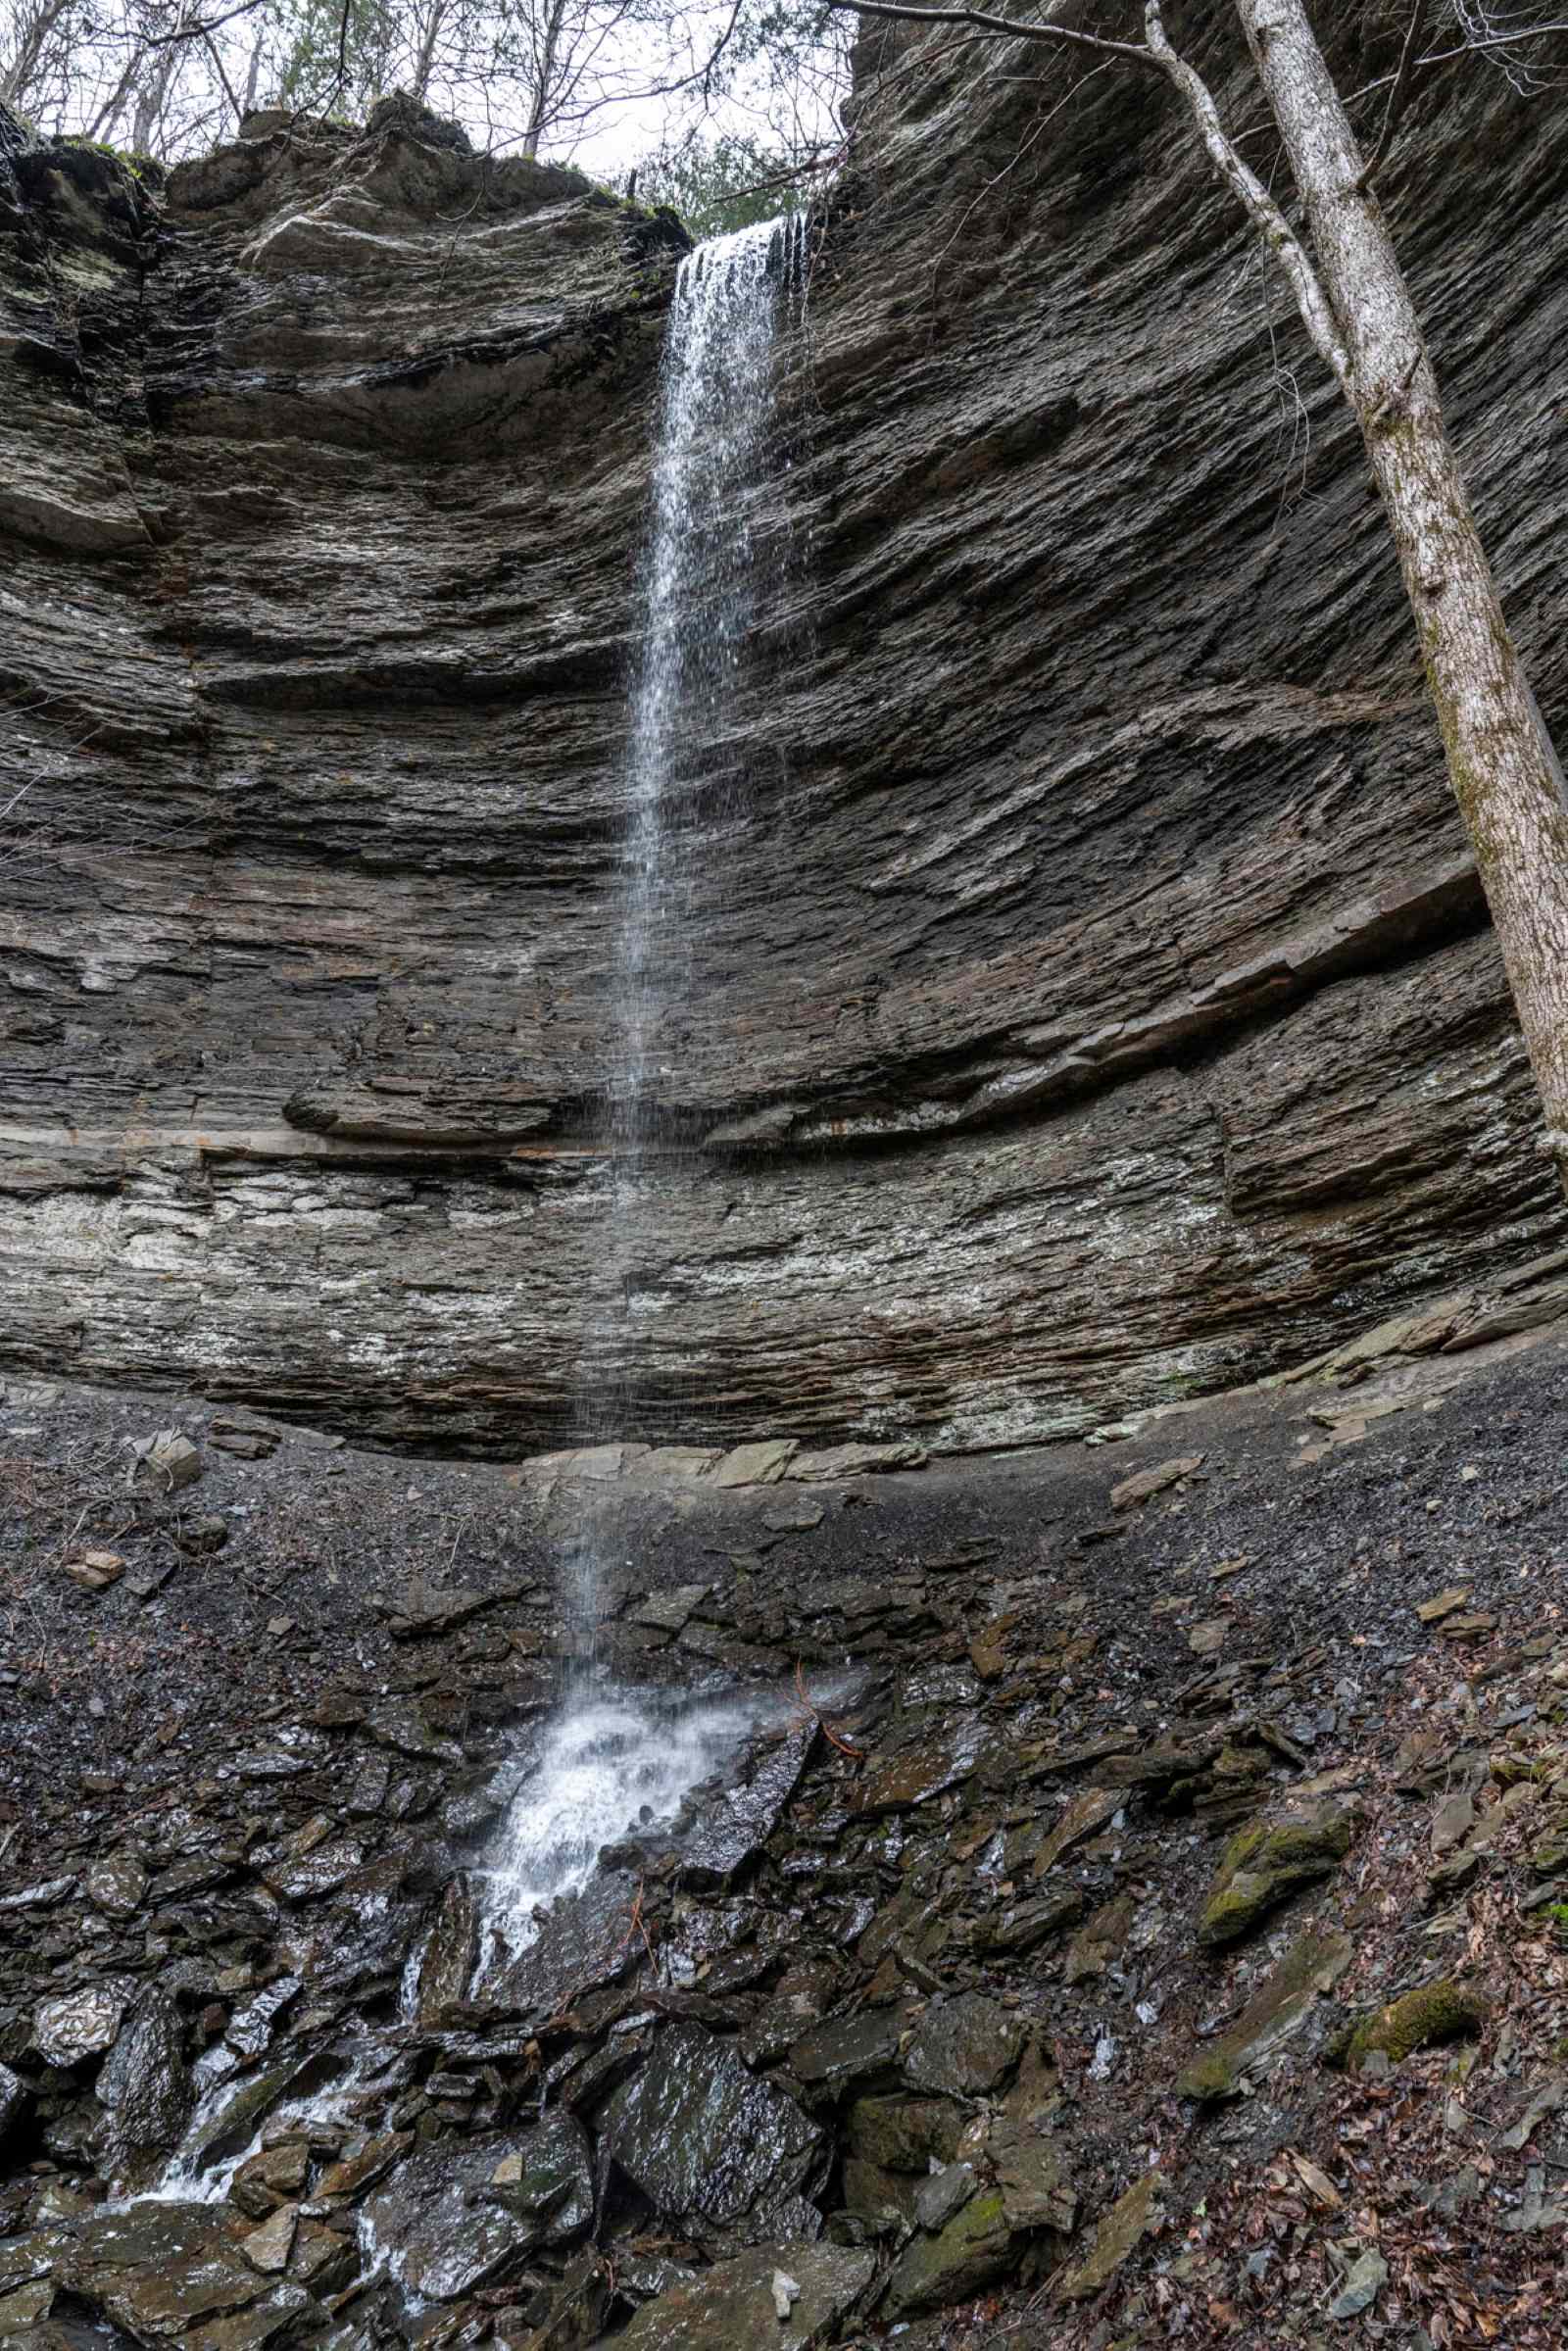 The 78-foot Terry Keefe Falls is found in an enclosed high bluff area at the end of a pretty half-mile trail.  (Photo by Sony Hocklander)